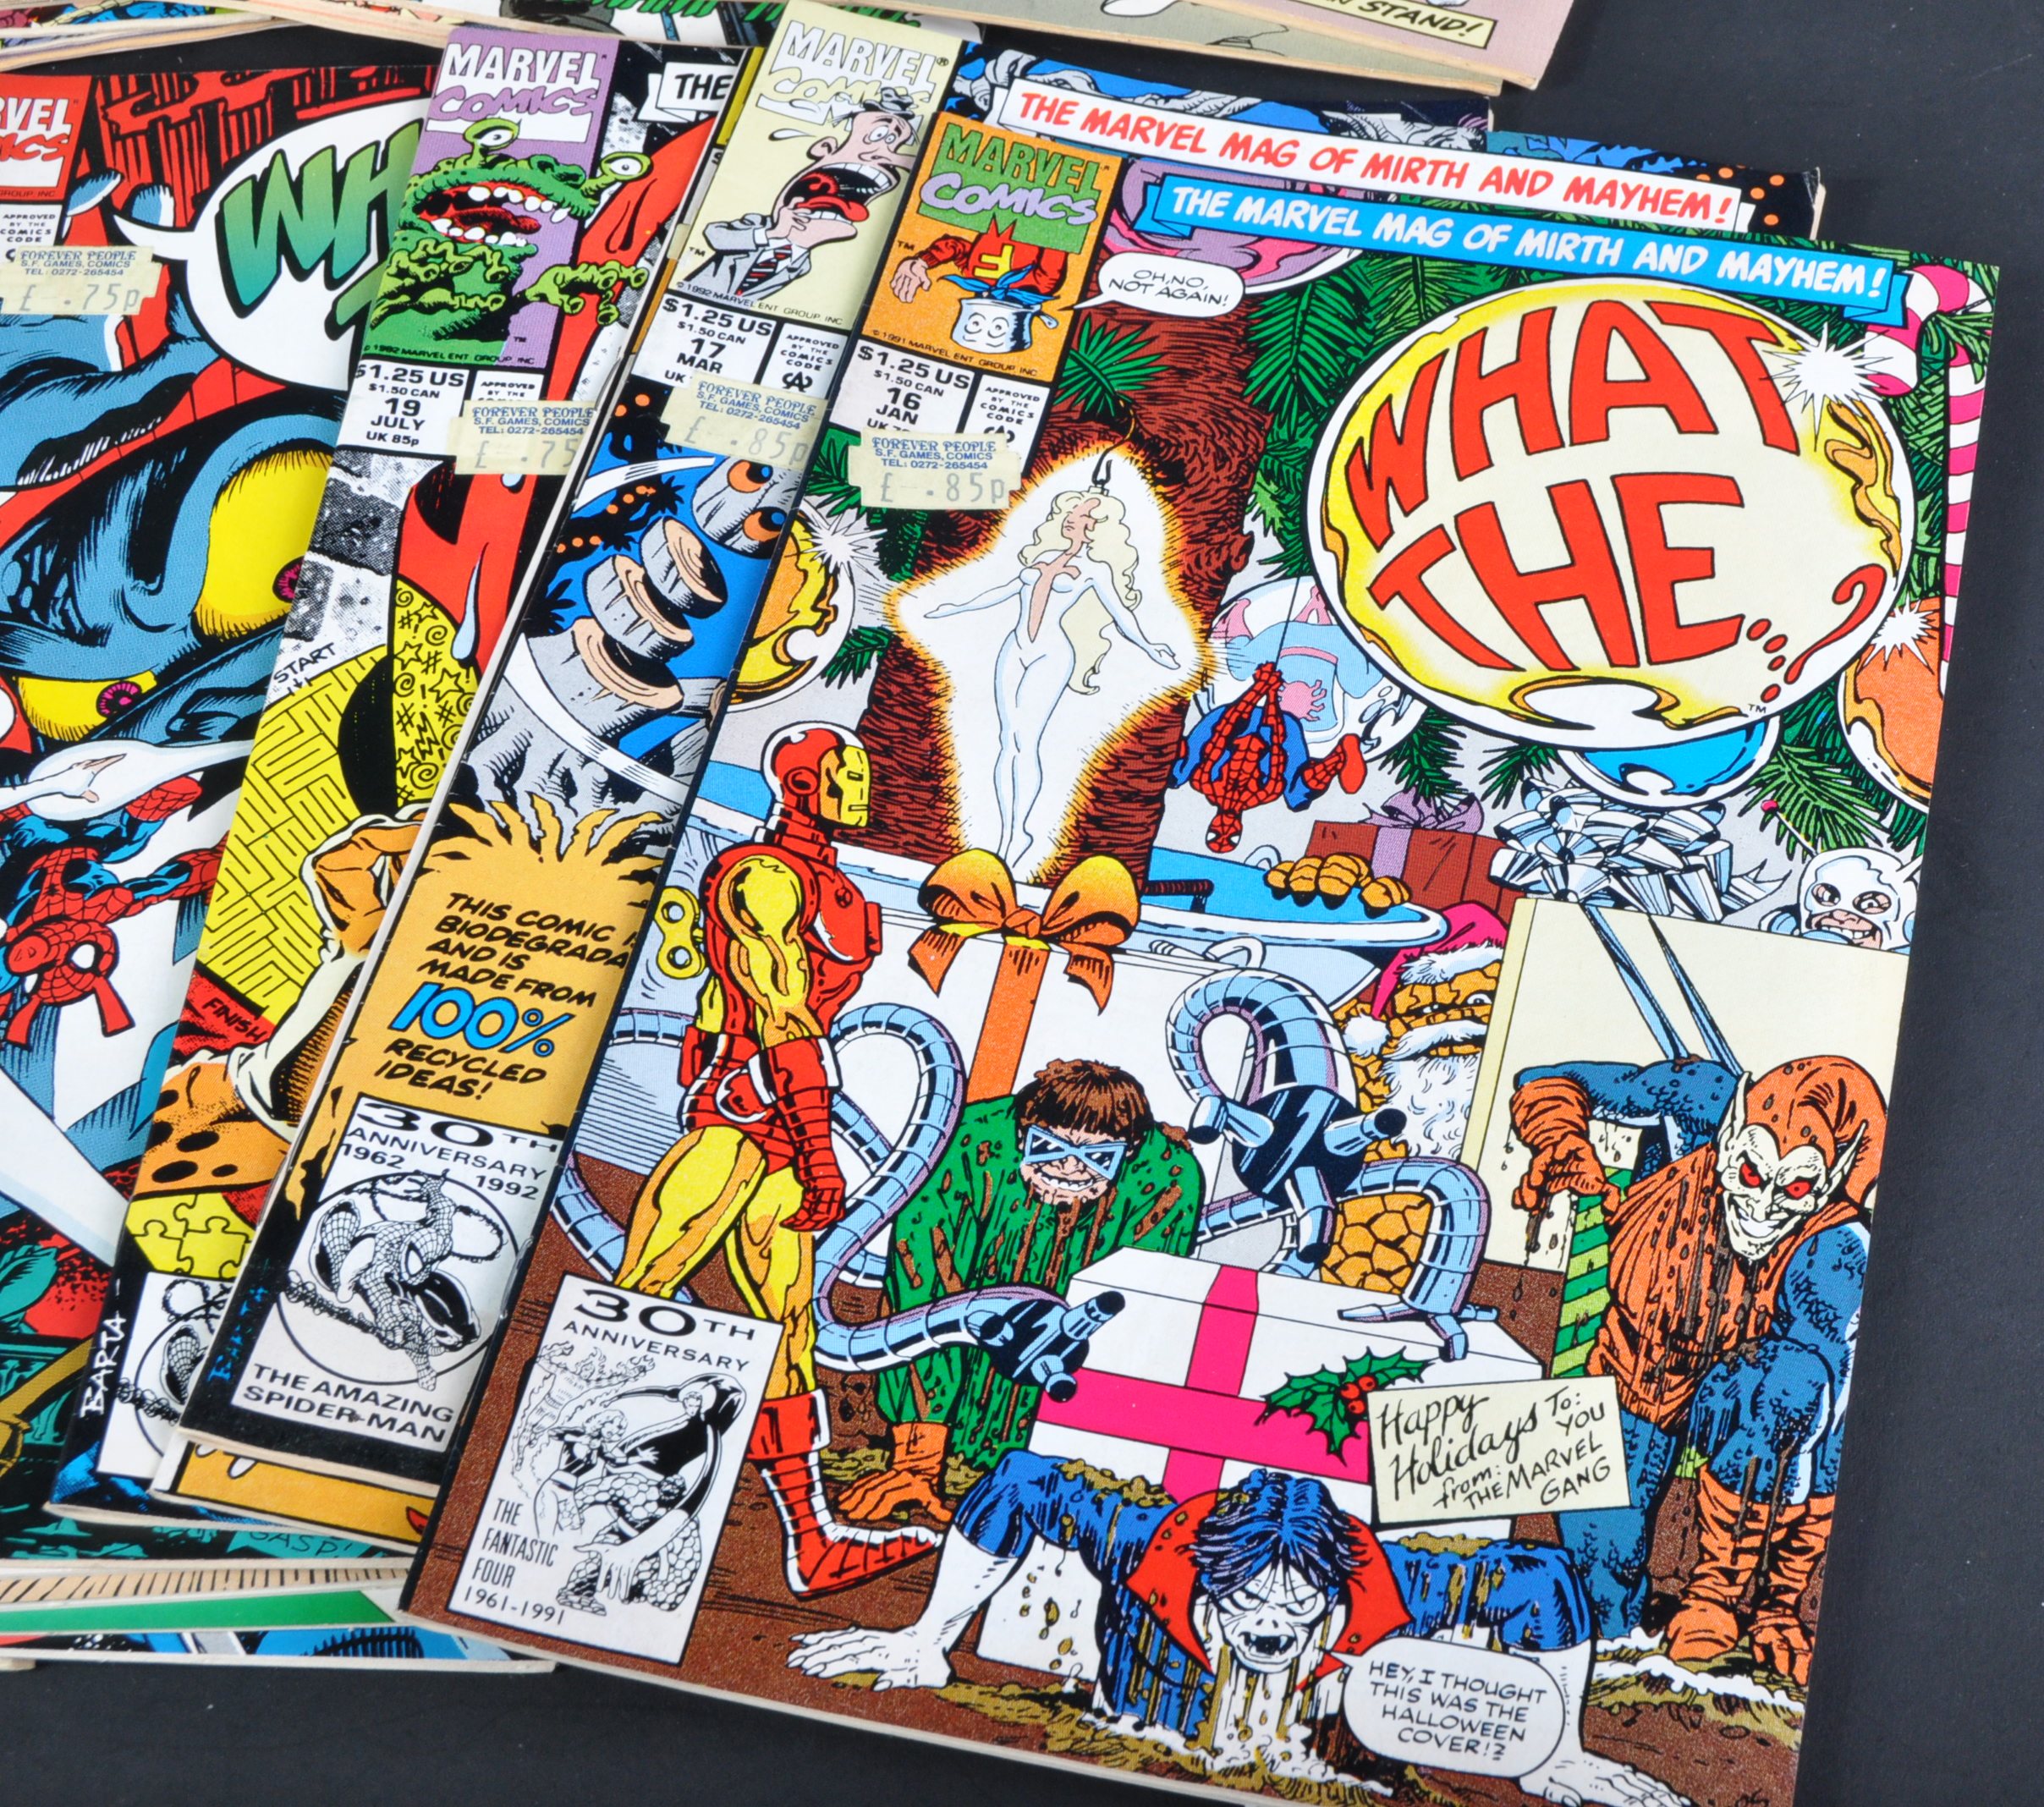 MARVEL COMICS - WHAT THE ..?! - COMPLETE RUN OF COMIC BOOKS - Image 2 of 6